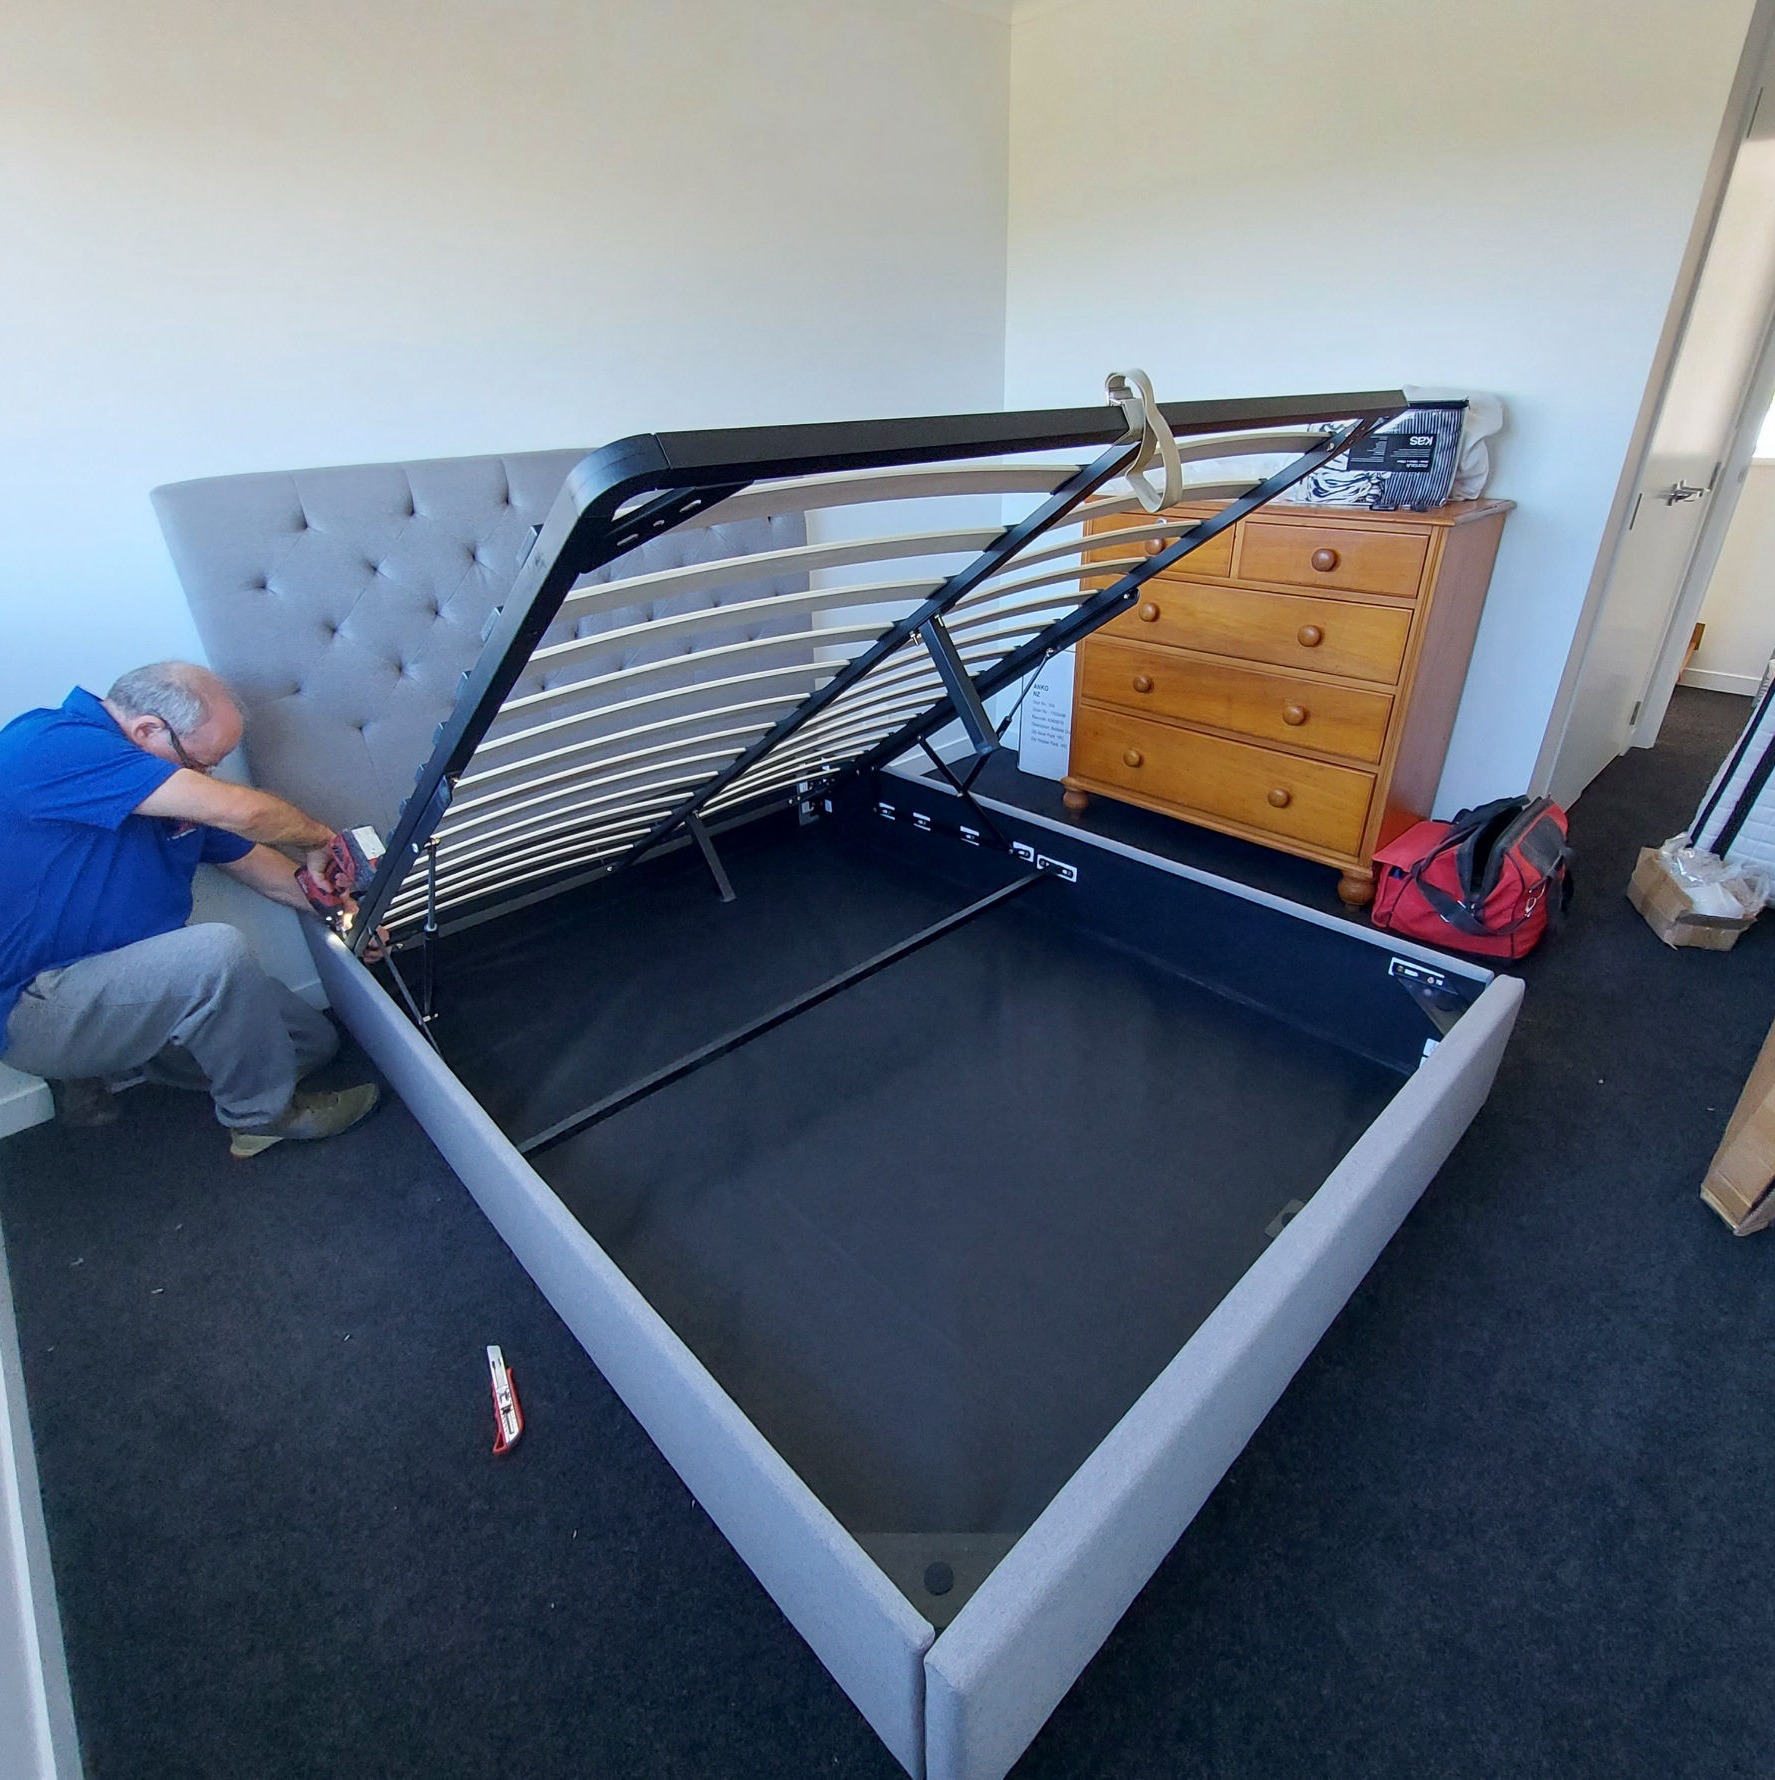 GAS LIFT BED FRAME ASSEMBLY